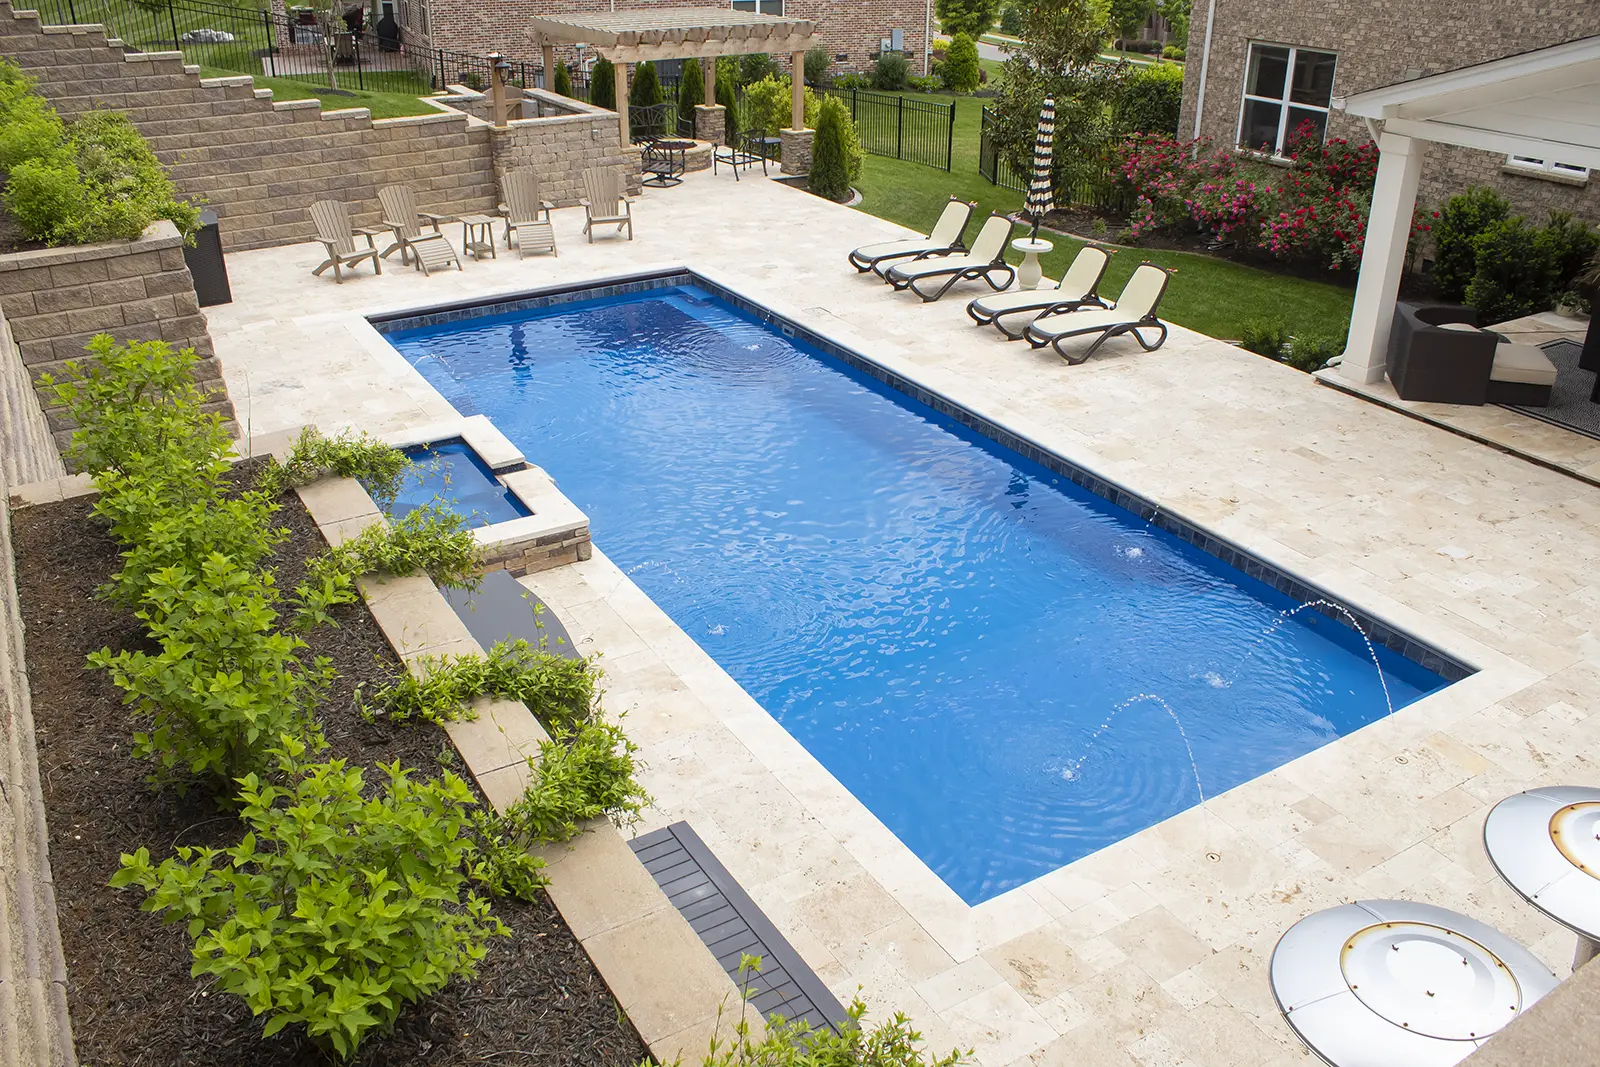 The Leisure Pools Pinnacle™ - let us install your pool in Beaufort, SC